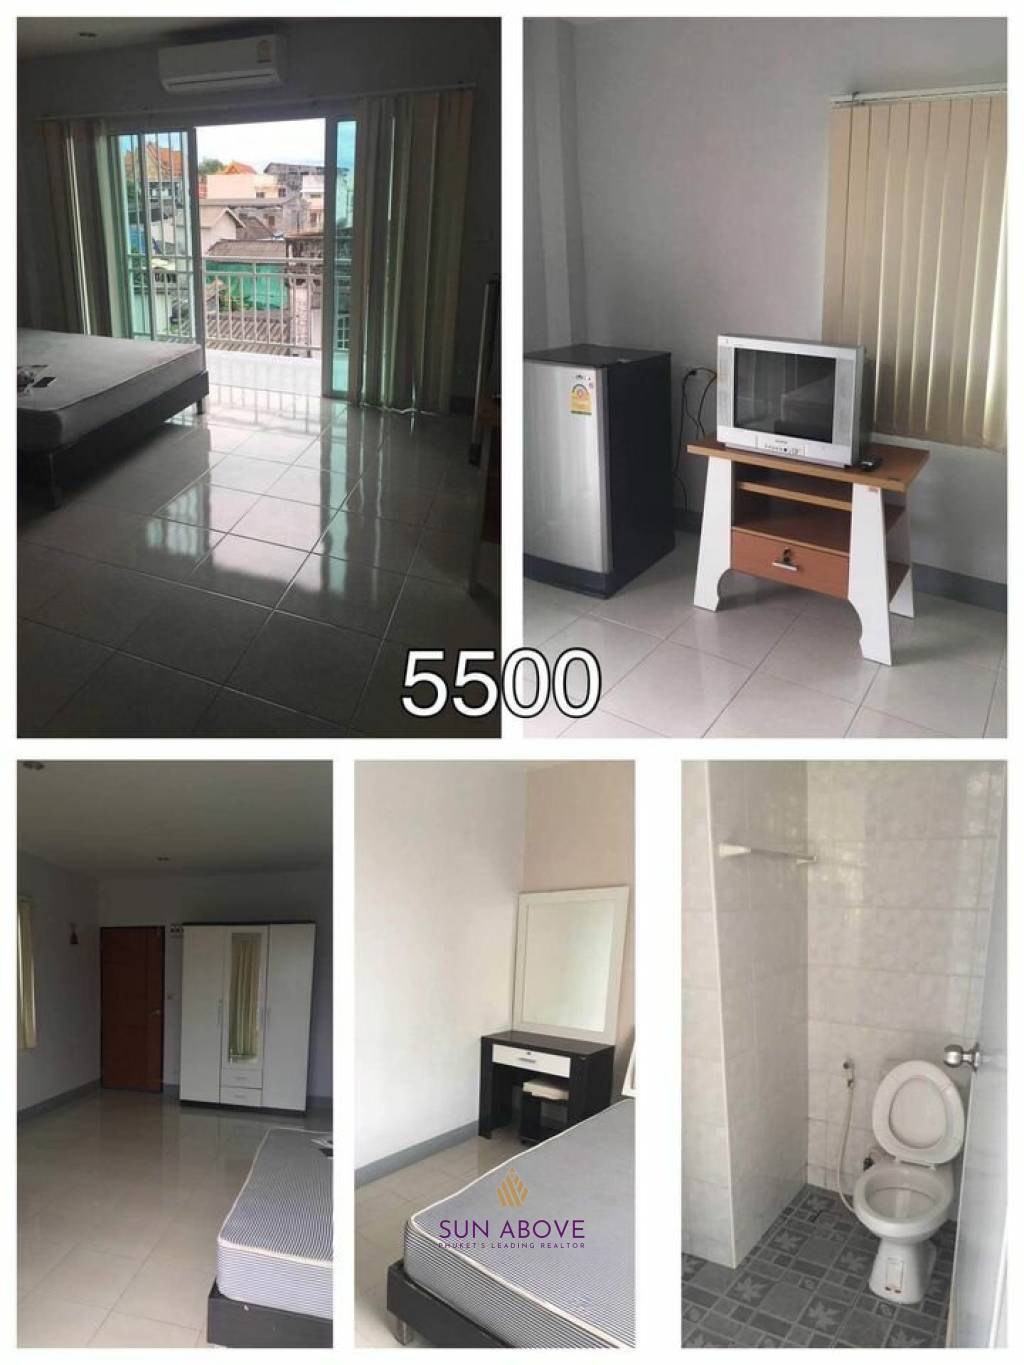 Apartment in Phuket for sale with tenants